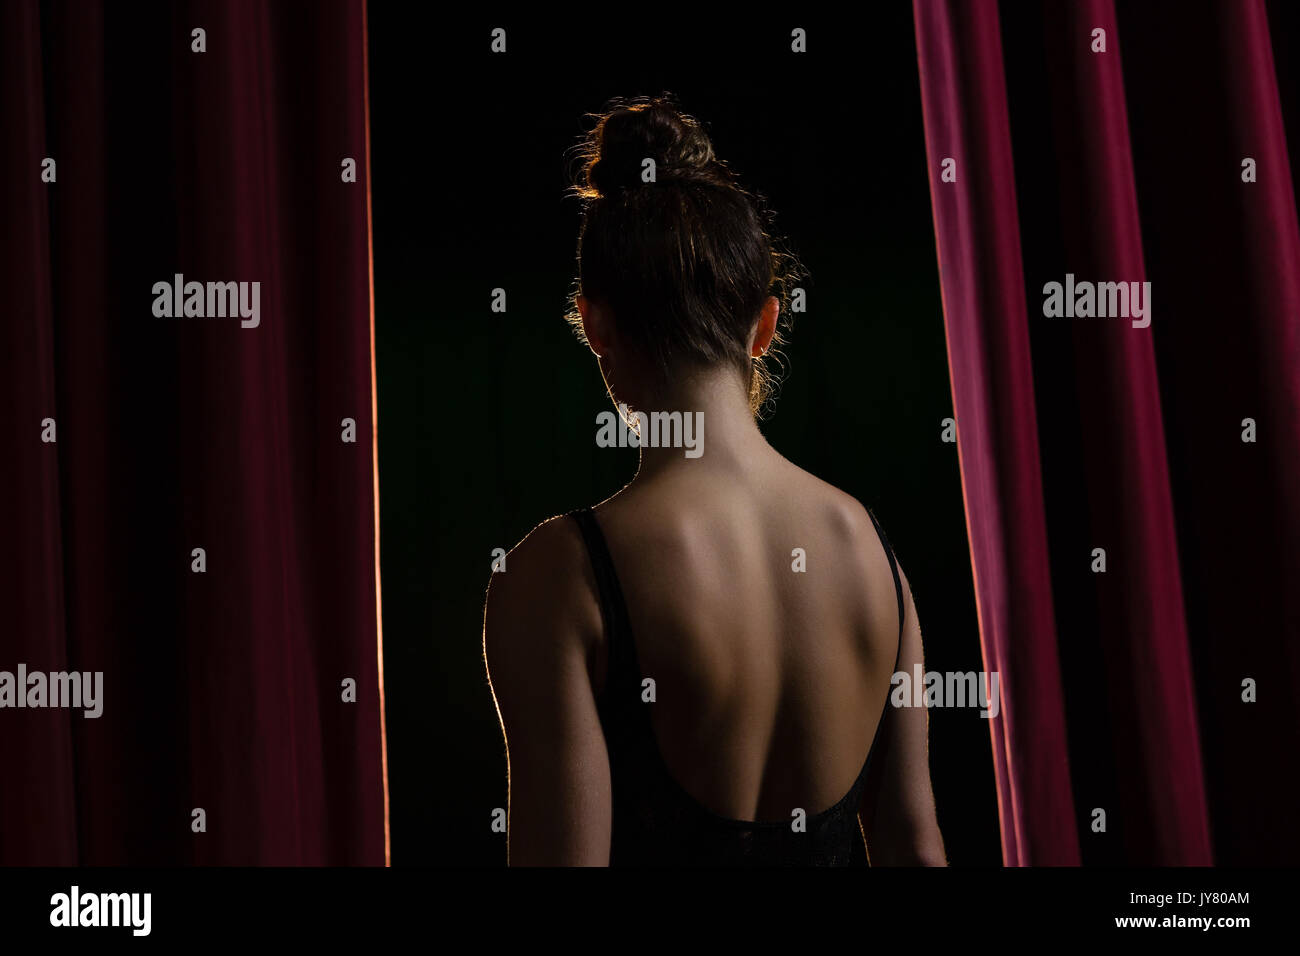 Rear view of ballerina performing ballet dance on stage in theatre Stock Photo